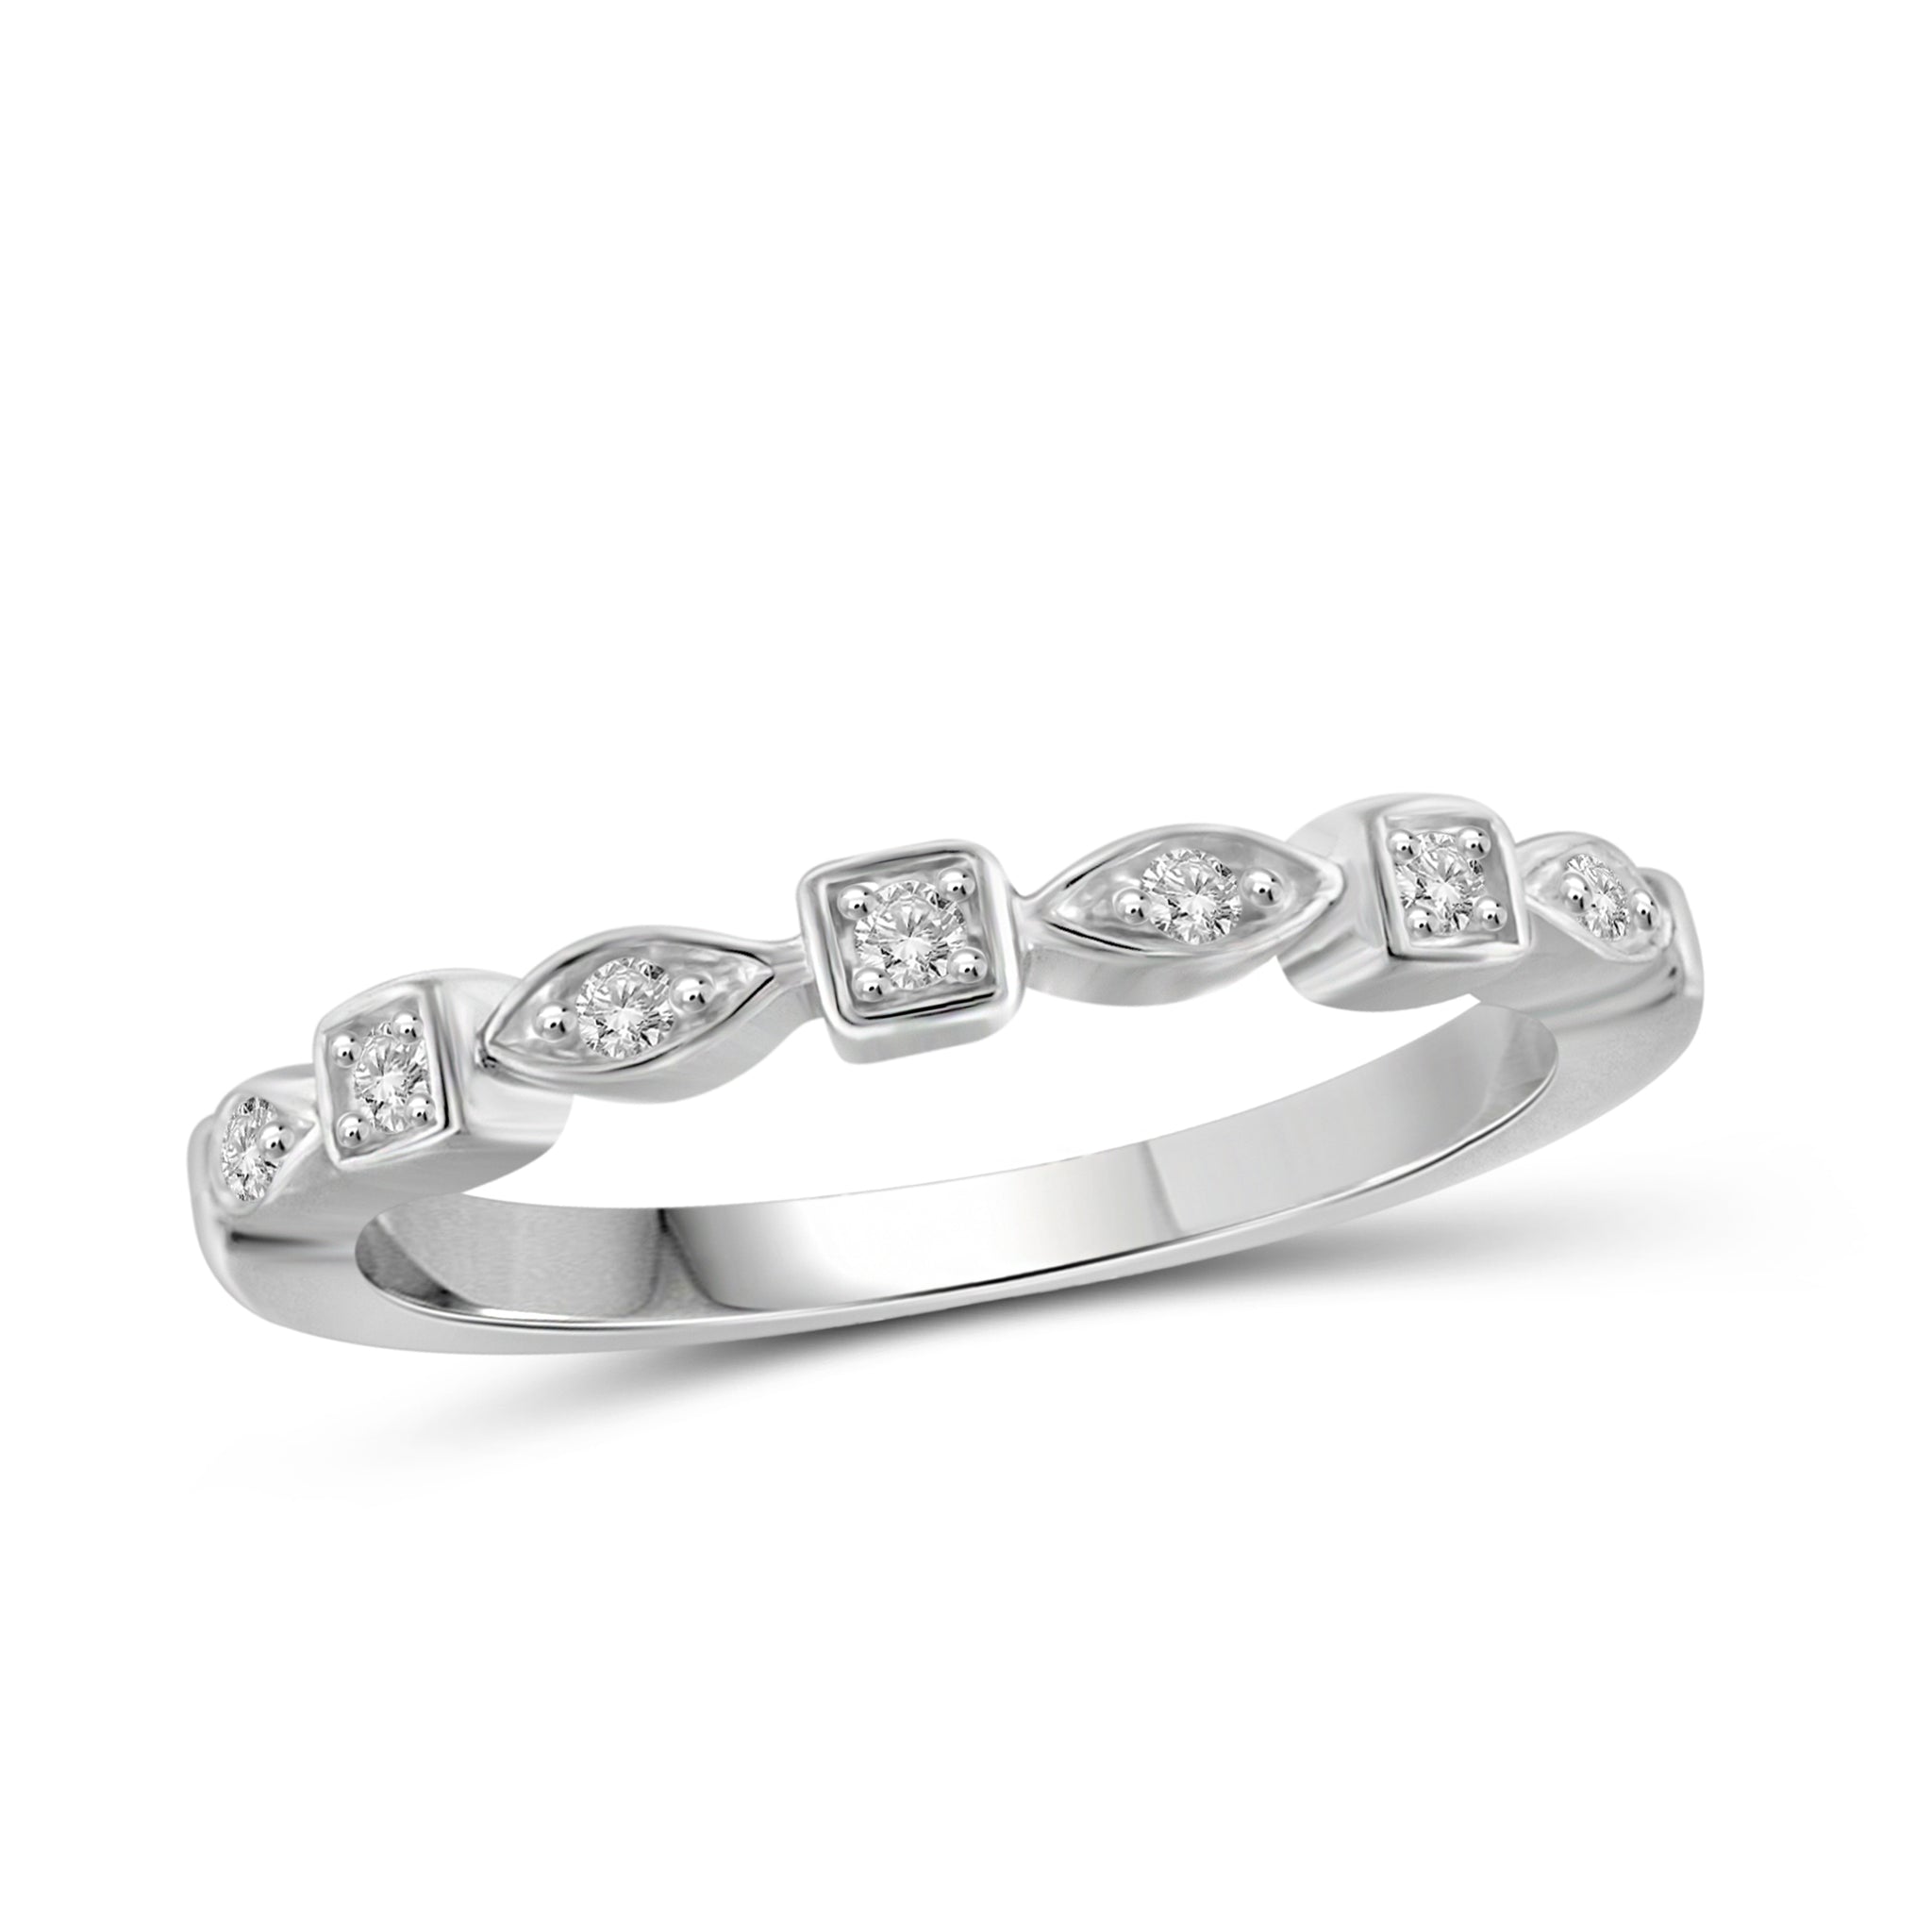 JewelonFire 1/10 Carat T.W. White Diamond Sterling Silver Stackable Band - Assorted Colors